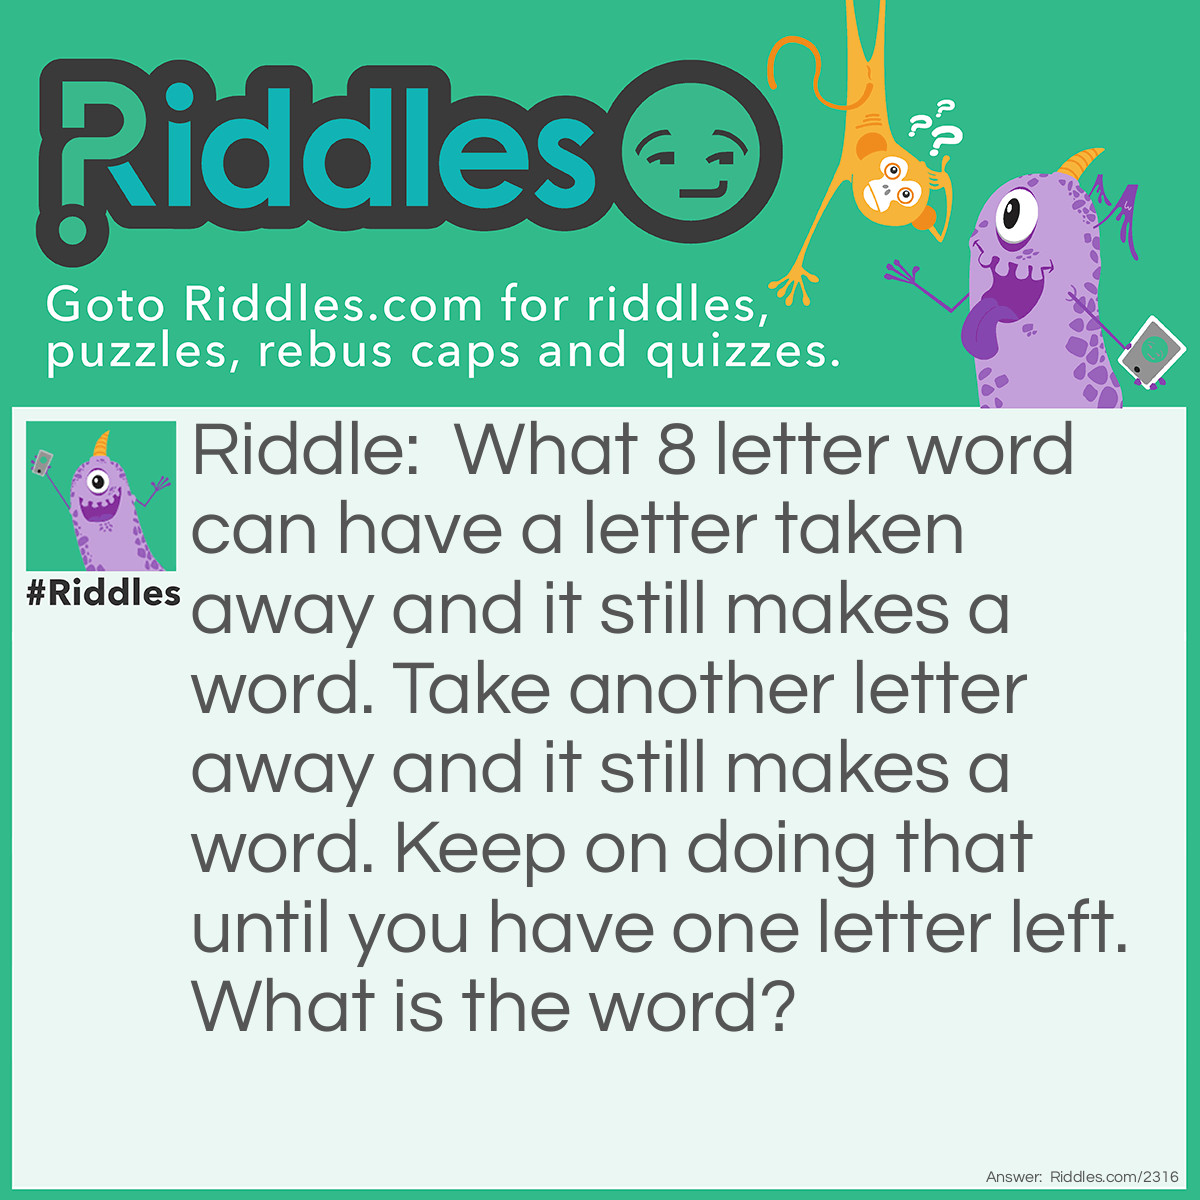 Riddle: What 8 letter word can have a letter taken away and it still makes a word. Take another letter away and it still makes a word. Keep on doing that until you have one letter left. What is the word? Answer: The word is "starting". Remove the middle "T" and you have "staring", Remove the "A" and you get "string", remove the "R" then you have "sting", remove the "T" and you get "sing". Remove the "G", and you get "sin", remove the "S" and you're left with "in",  and finally, remove the "N" and you're left with "I".